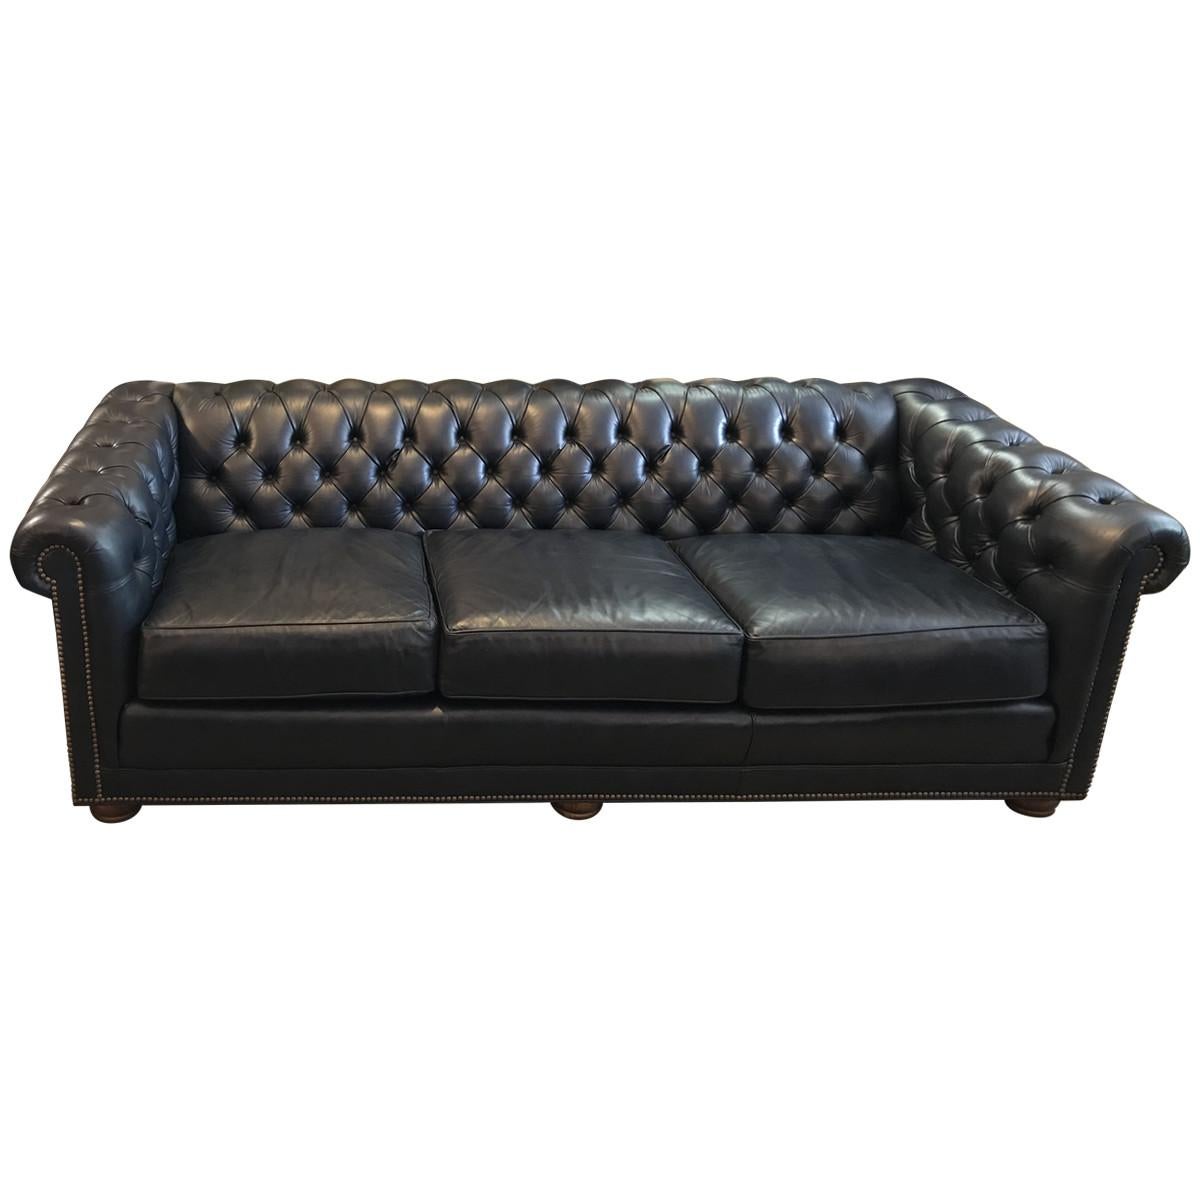 Leather Chesterfield Three-Seat Sofa